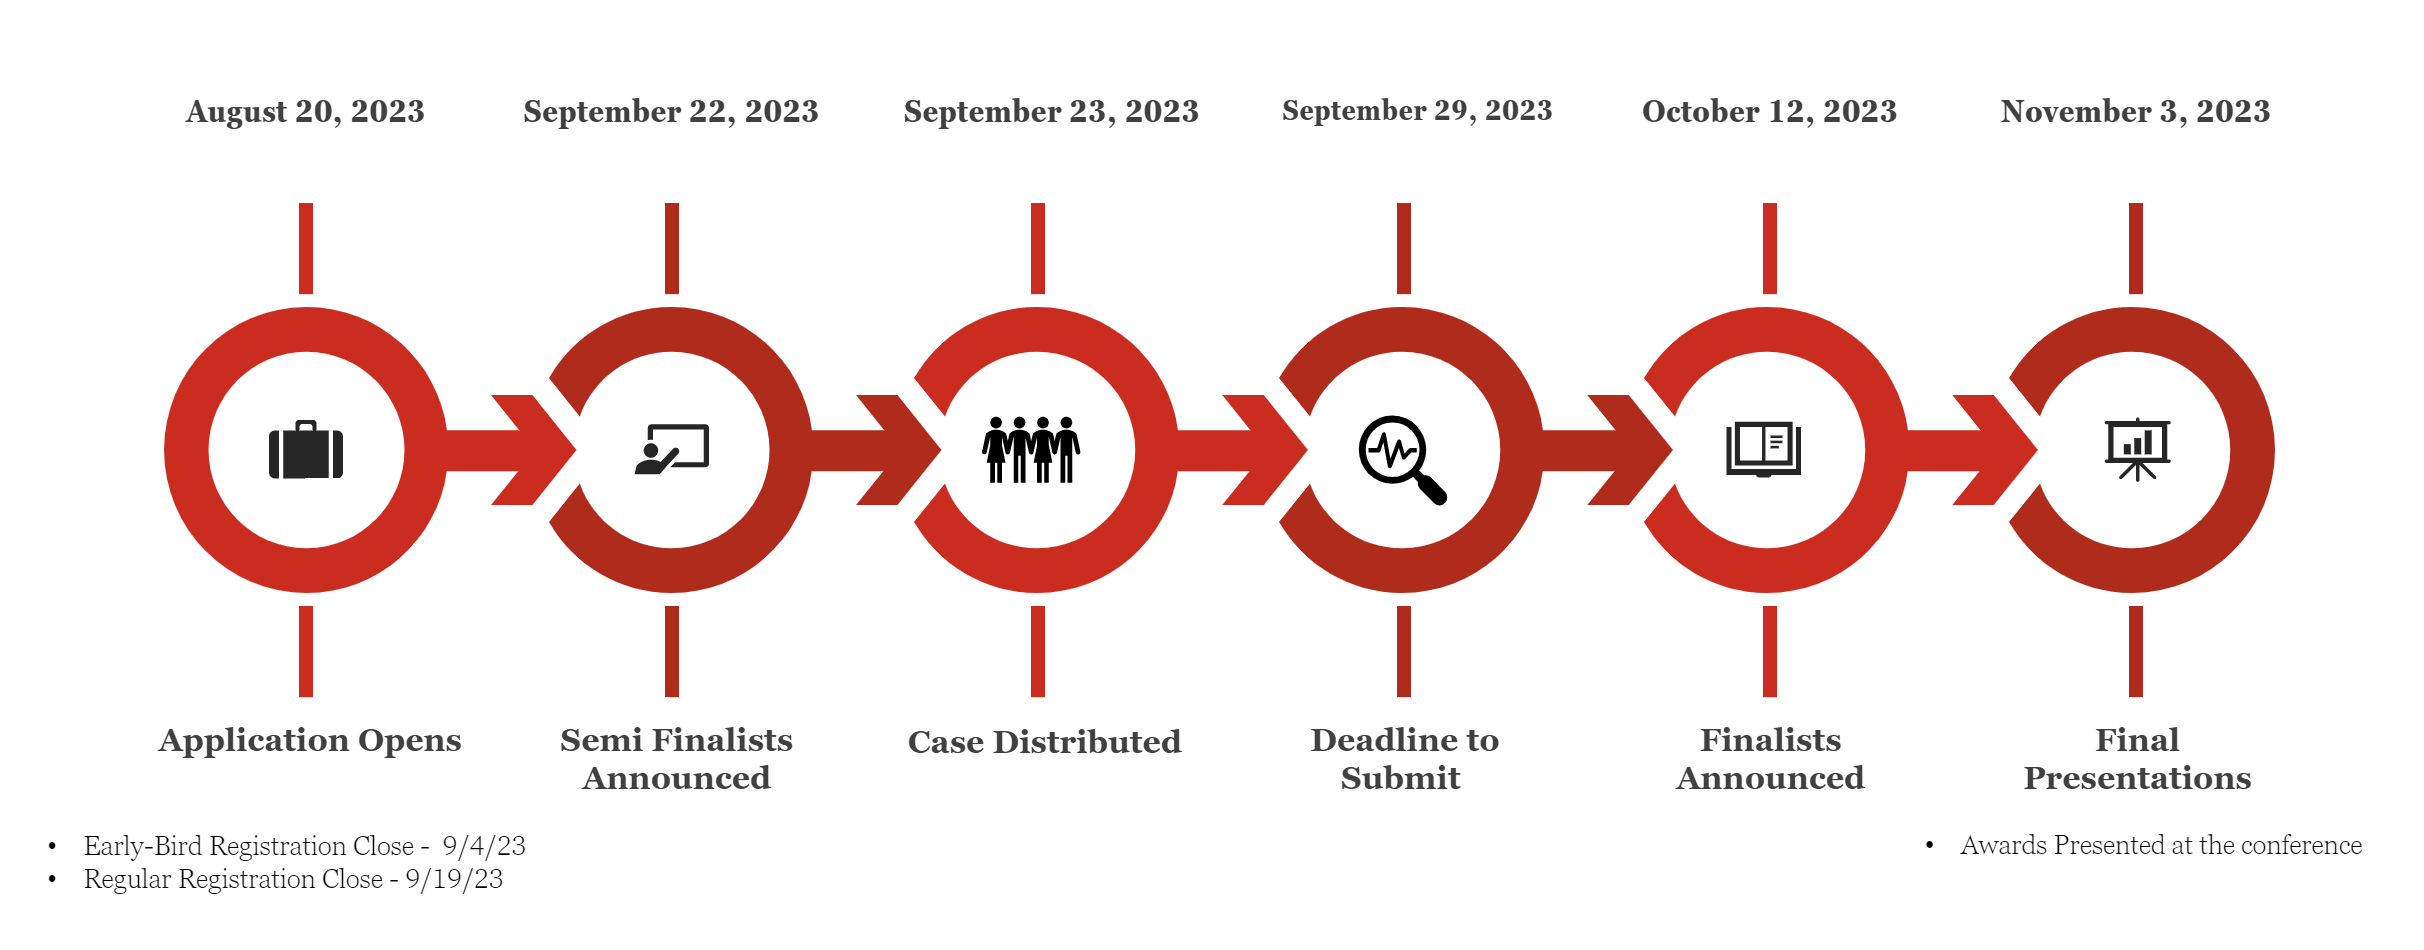 Case competition 2023 timeline: Application open on Aug 20, Semi Finalists are announced on Sep 22, they receive the case on Sep 23, Submit the case by Sep 29. The finalists are announced on Oct 12, and the final presentations will be in person on Nov 3 at Cornell Tech, or online, live.